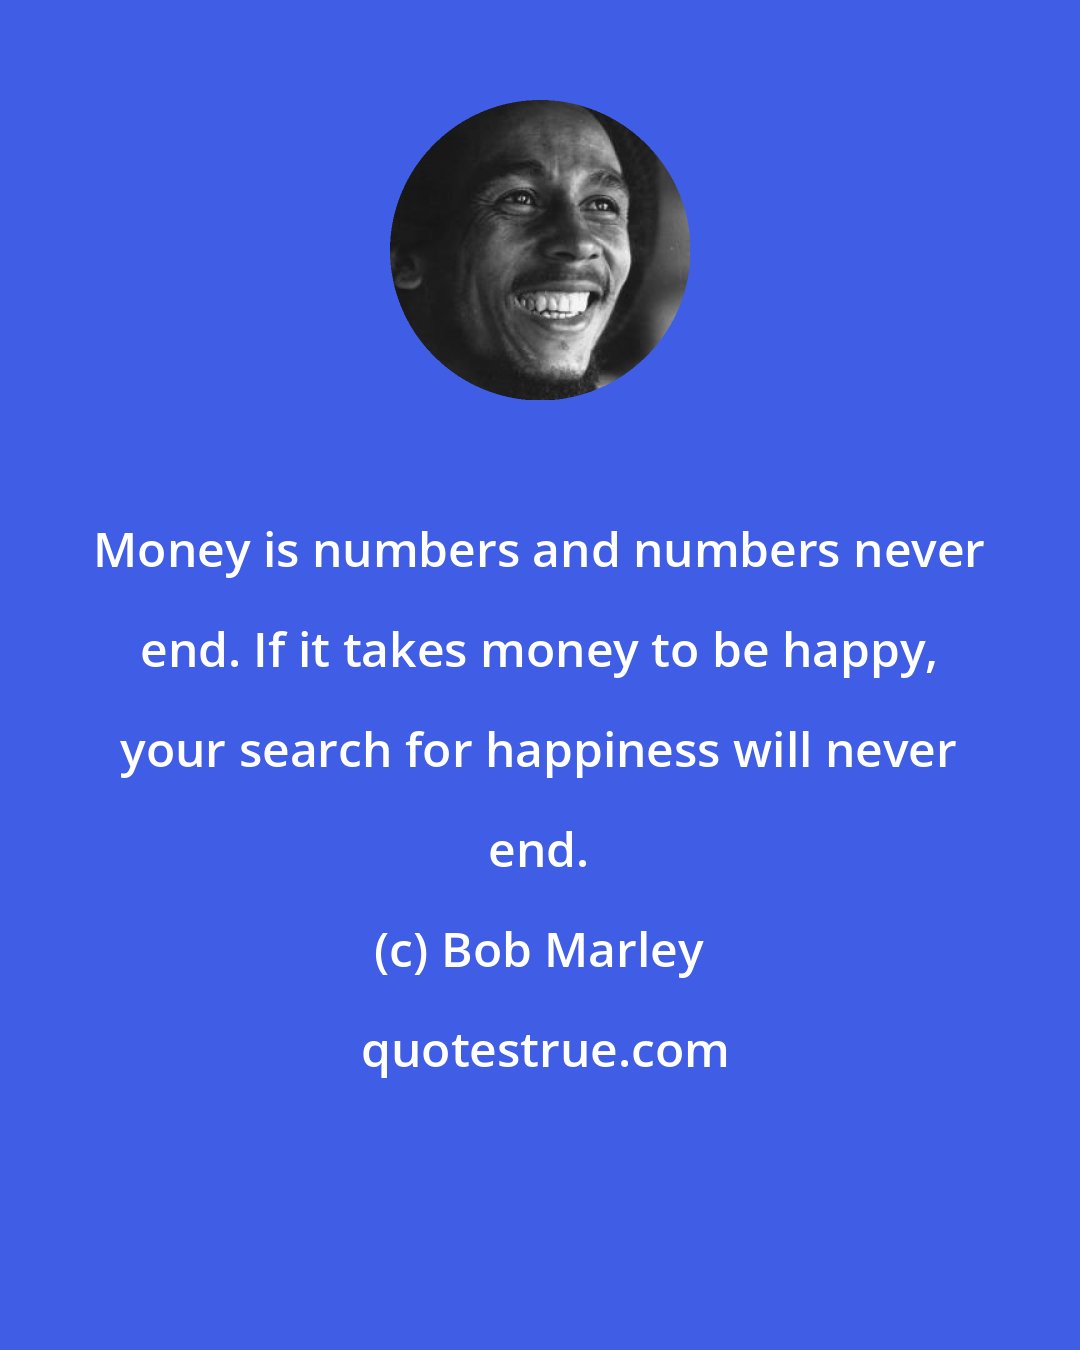 Bob Marley: Money is numbers and numbers never end. If it takes money to be happy, your search for happiness will never end.